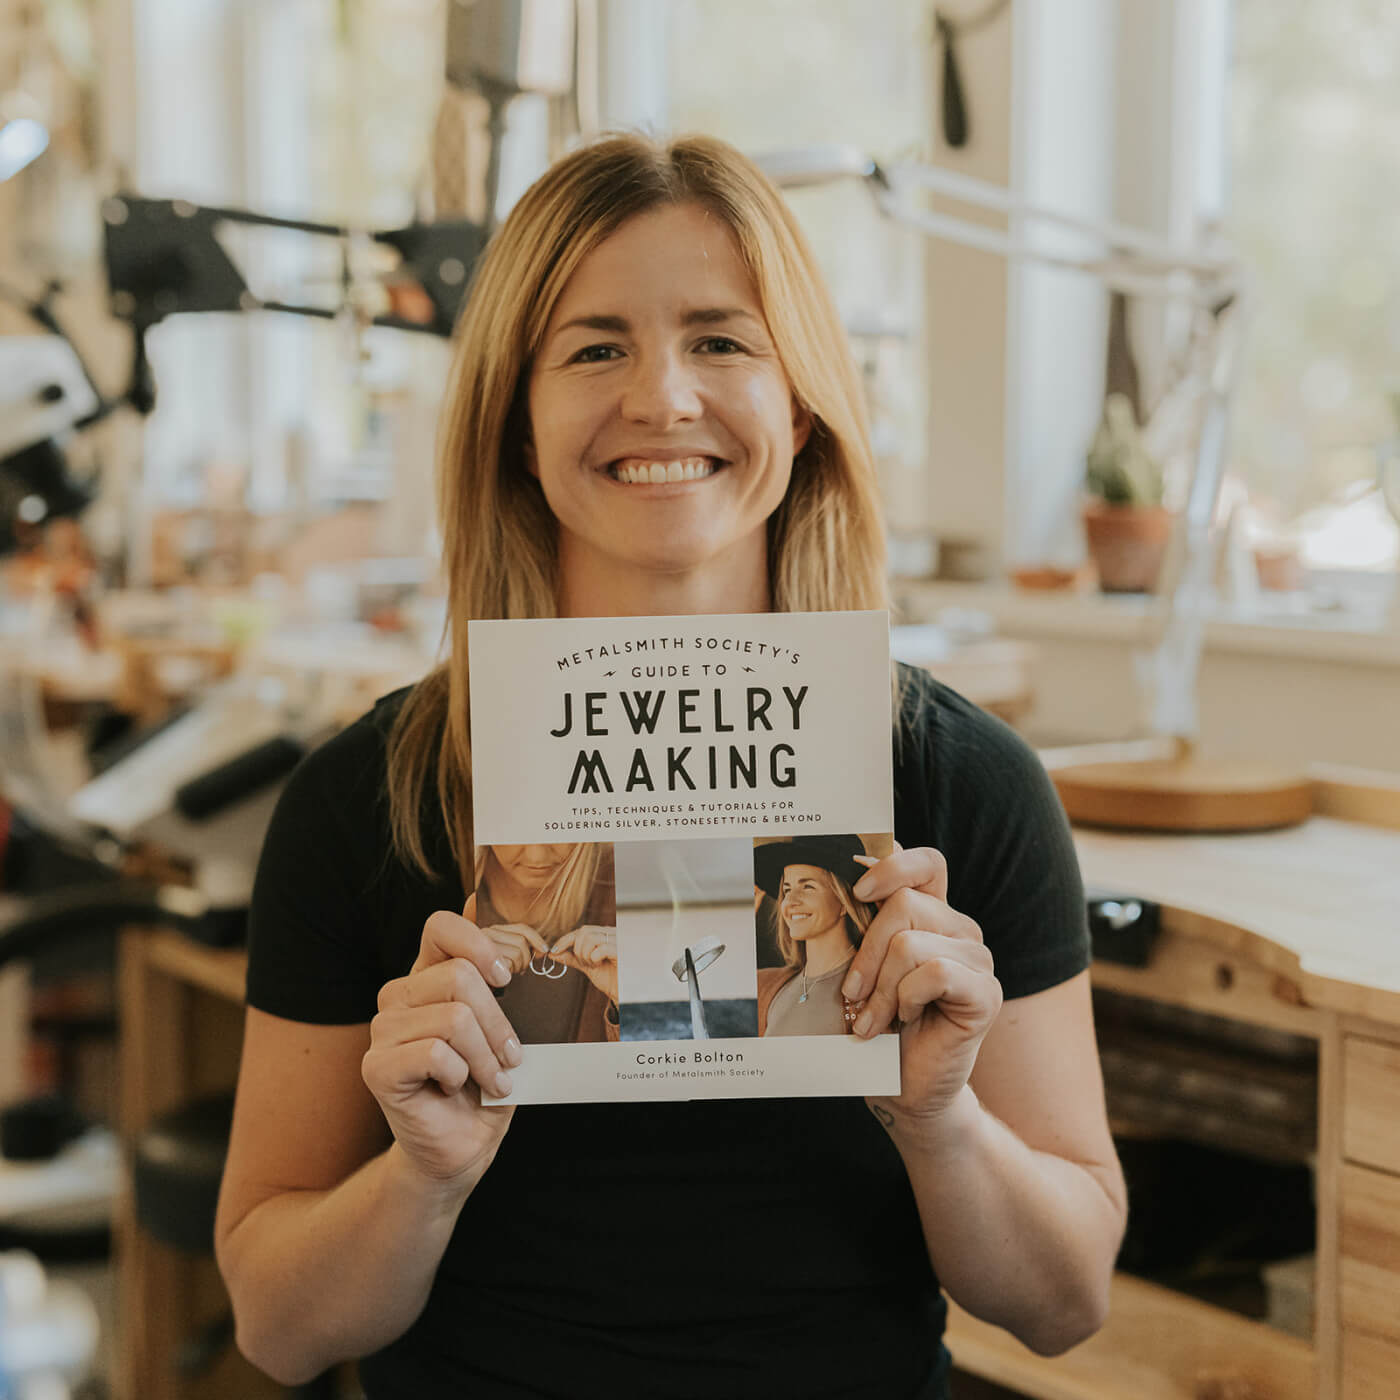 Metalsmith Society's Guide To Jewelry Making